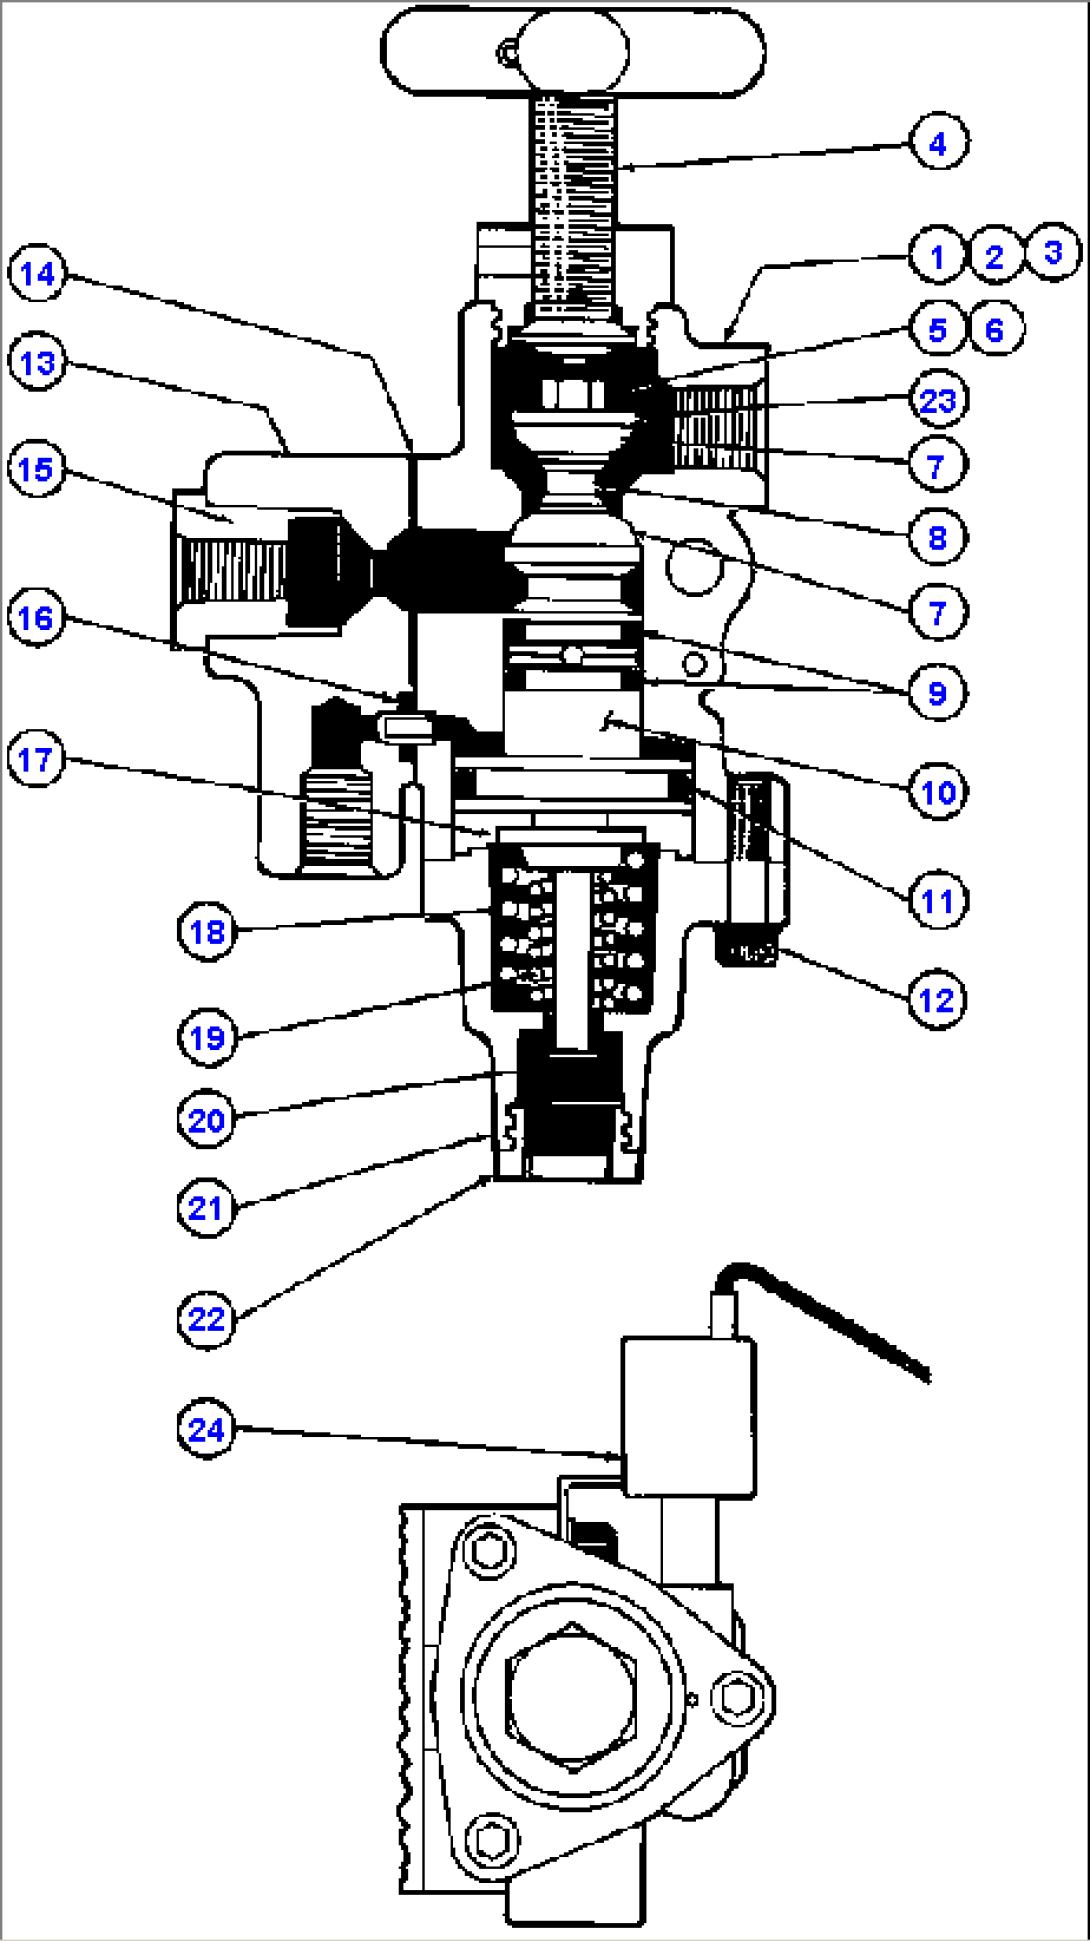 AIR GOVERNOR VALVE ASSEMBLY (VW5504)